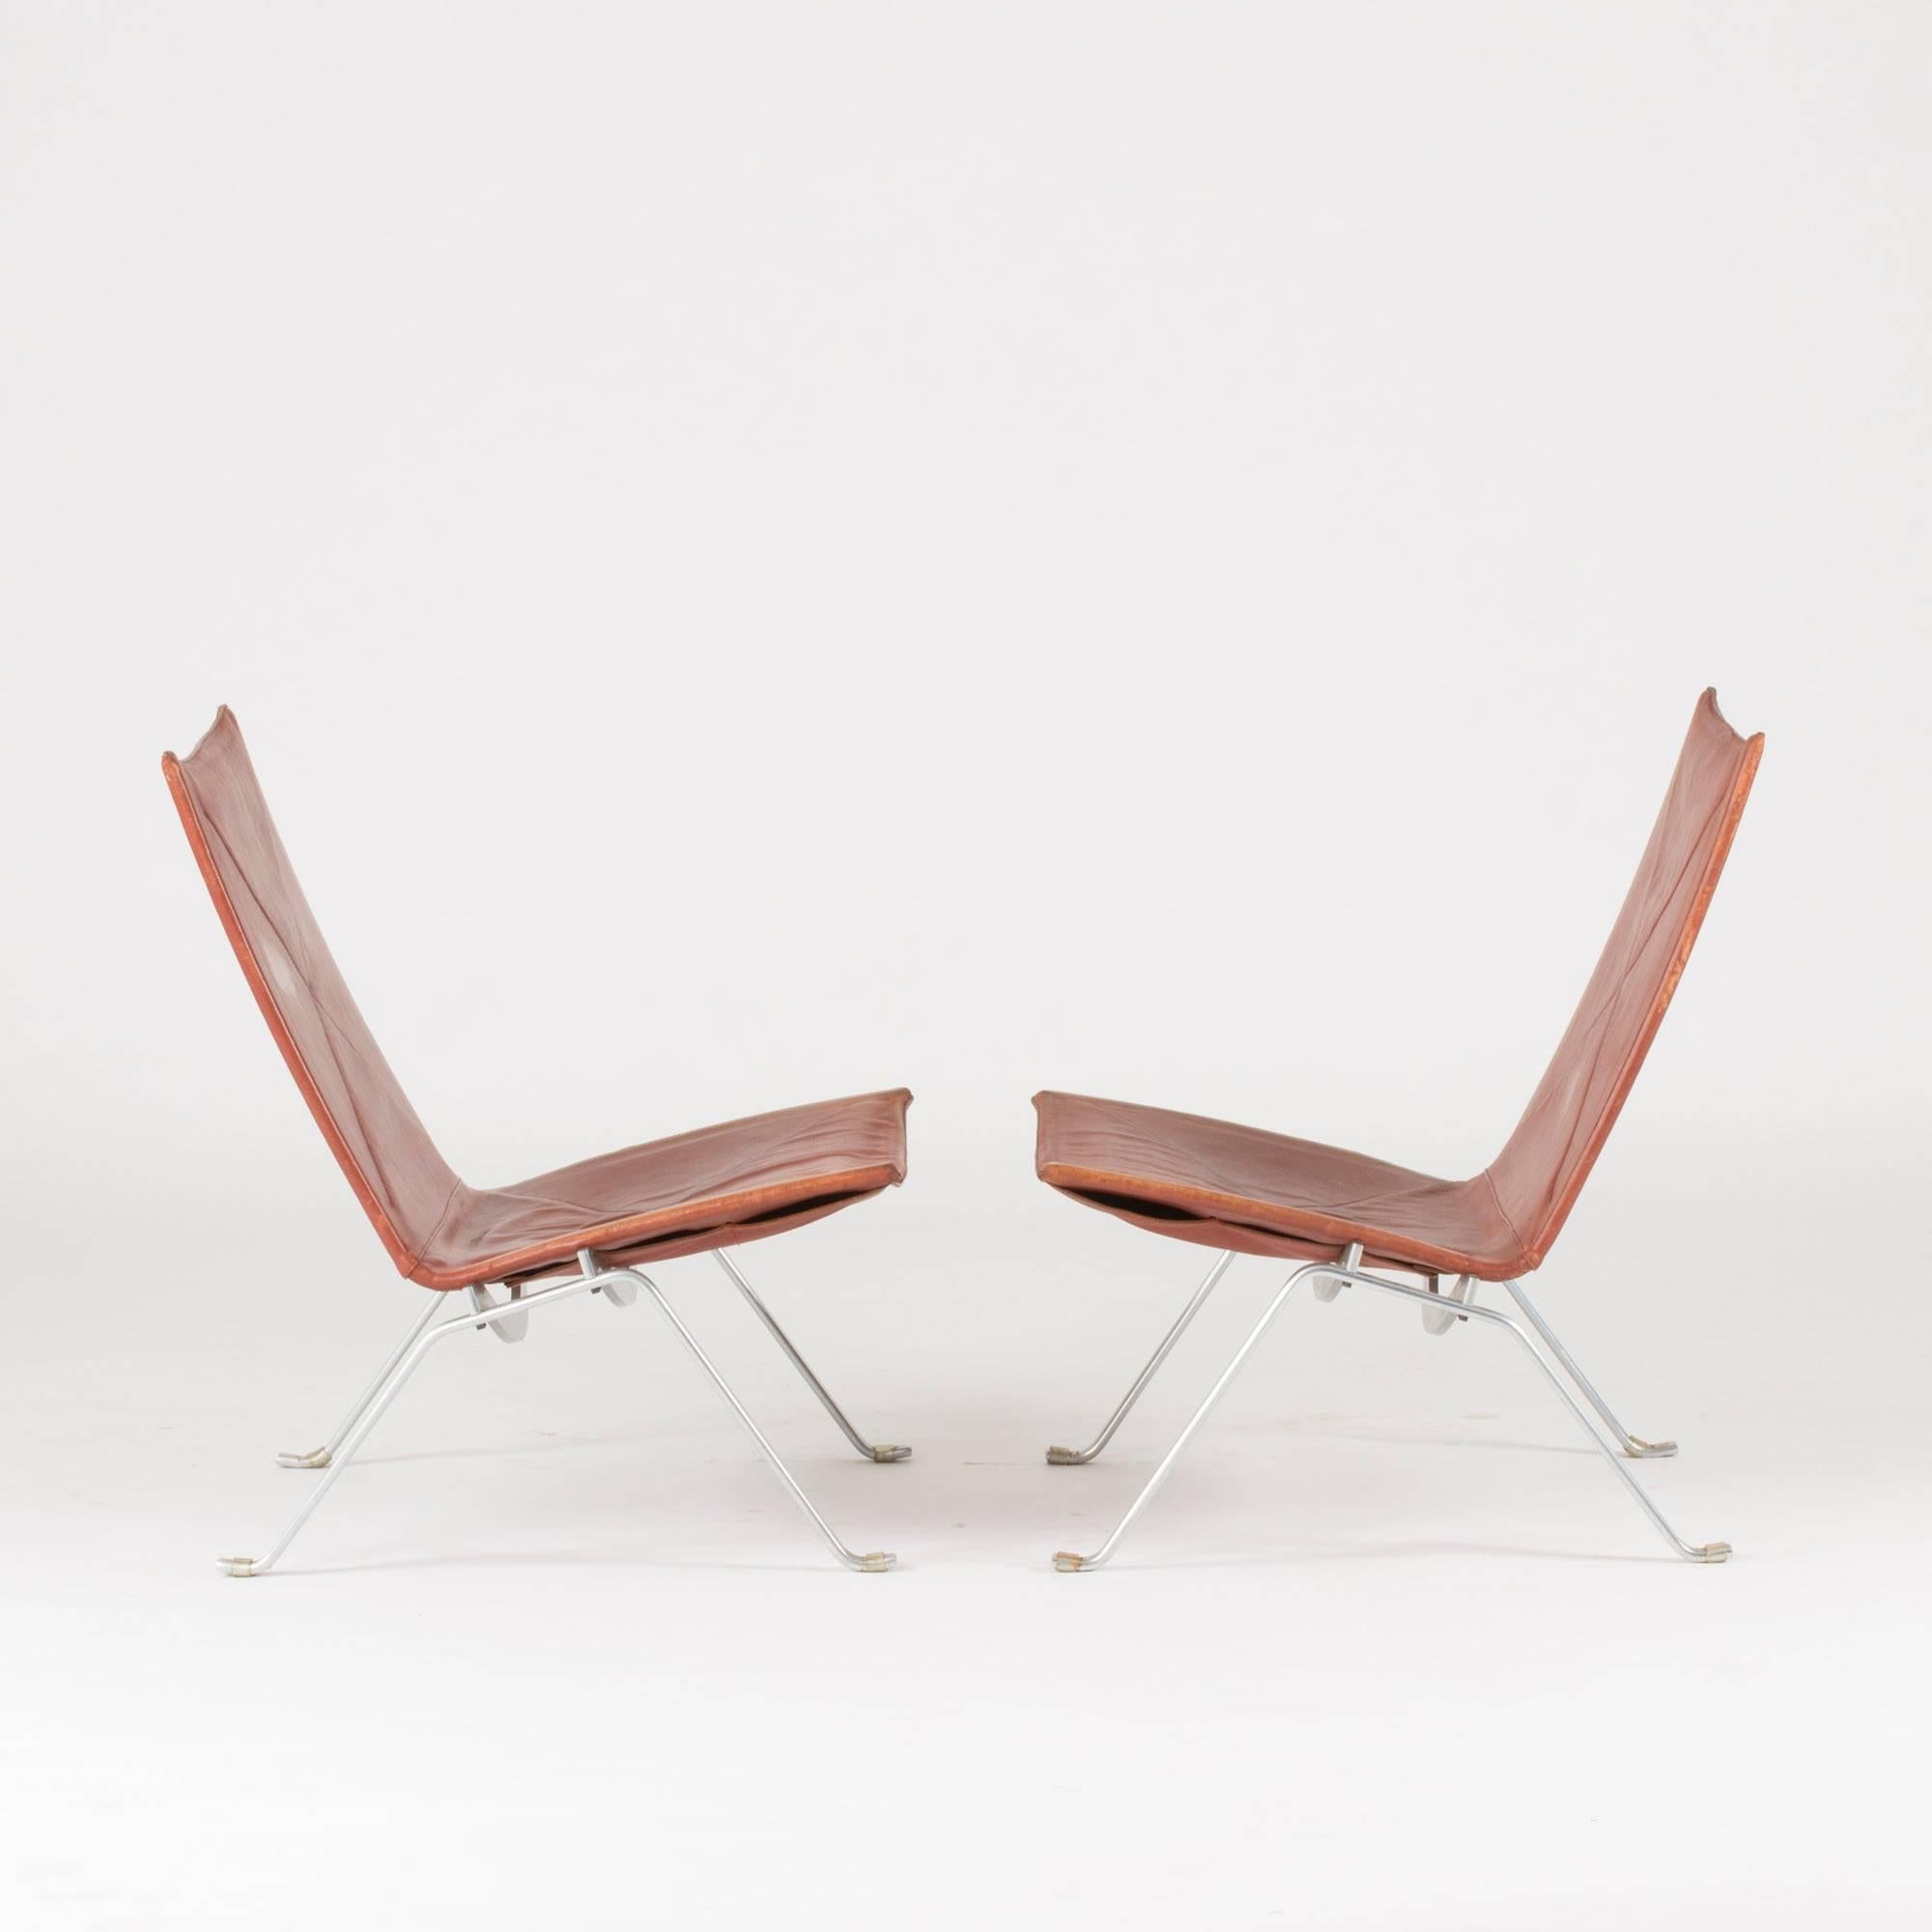 Pair of “PK 22” lounge chairs by Poul Kjaerholm, made from brushed steel and rust colored leather. Made by original producer E. Kold Christensen. A repair has been made to the leather on one corner of one of the chairs.